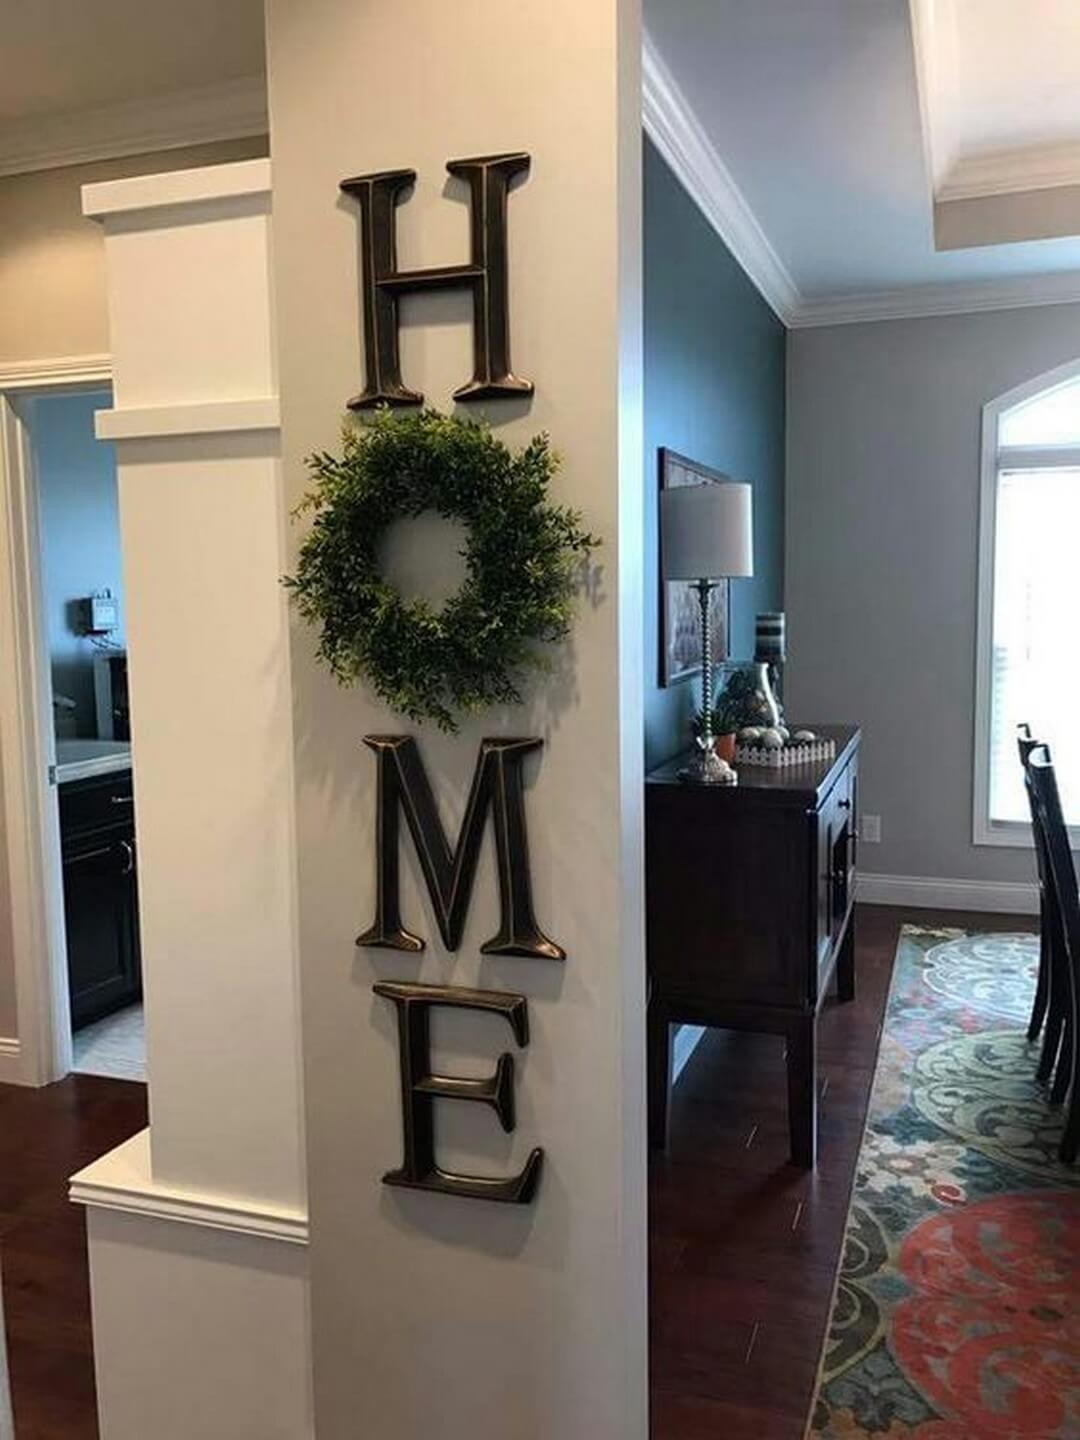 45+ Best Farmhouse Wall Decor Ideas and Designs for 2020